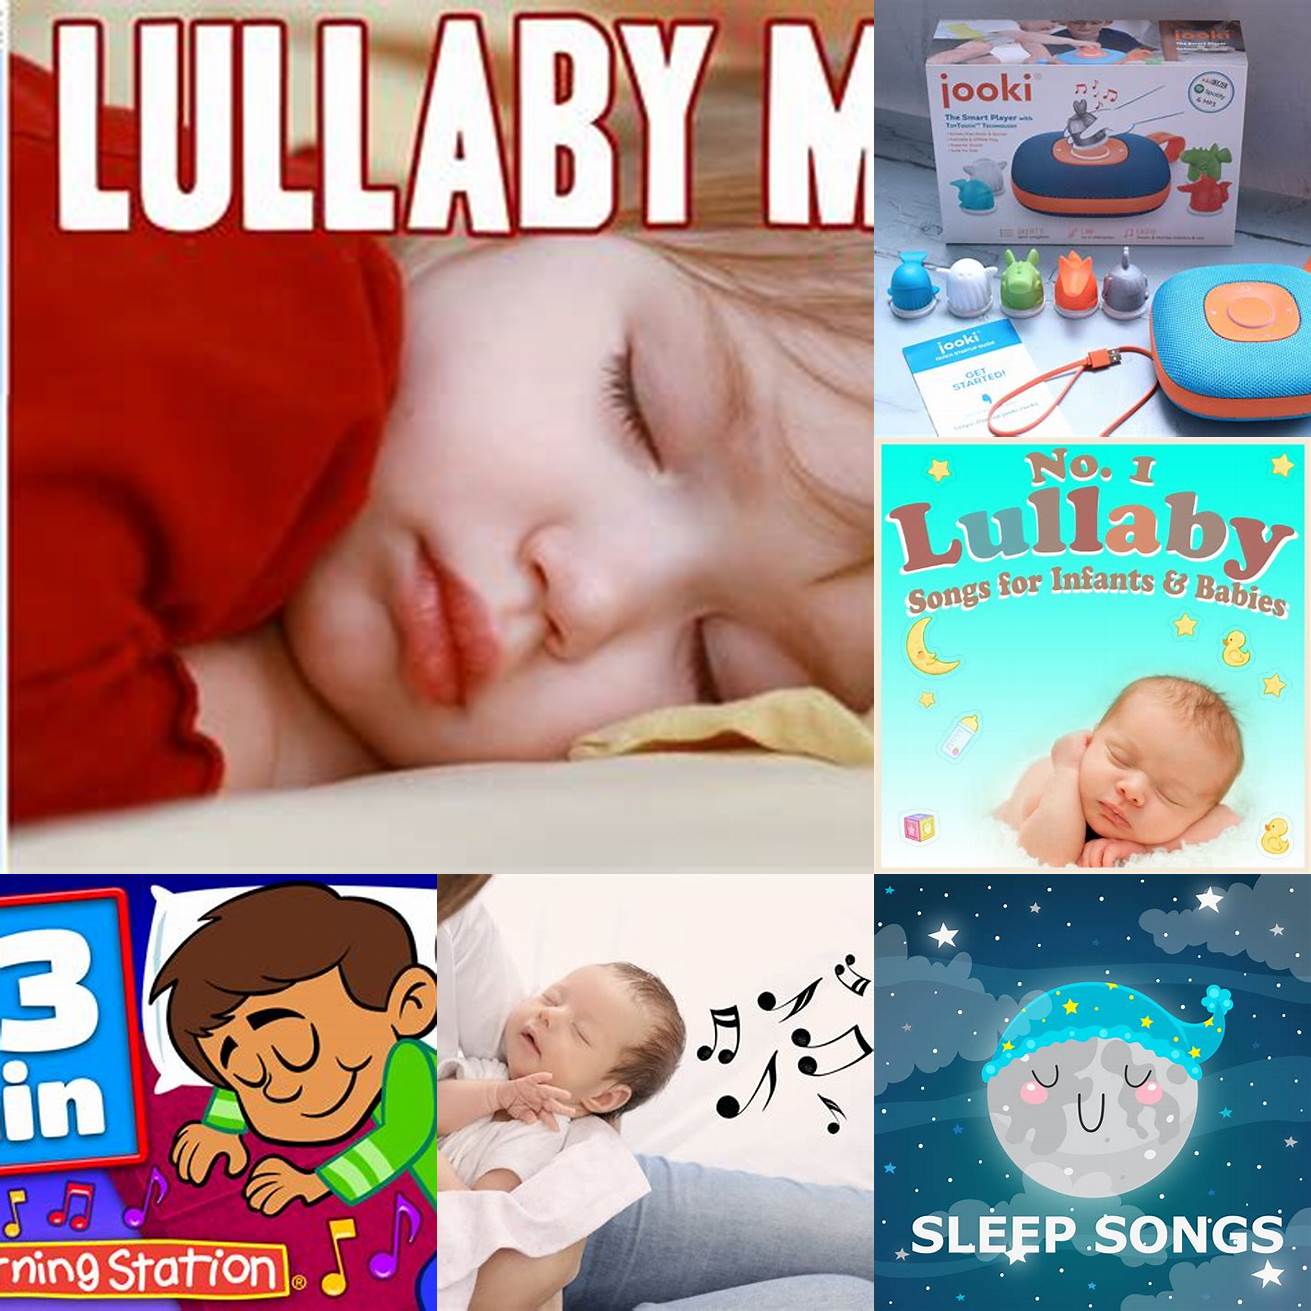 Smart music player with lullabies and other songs